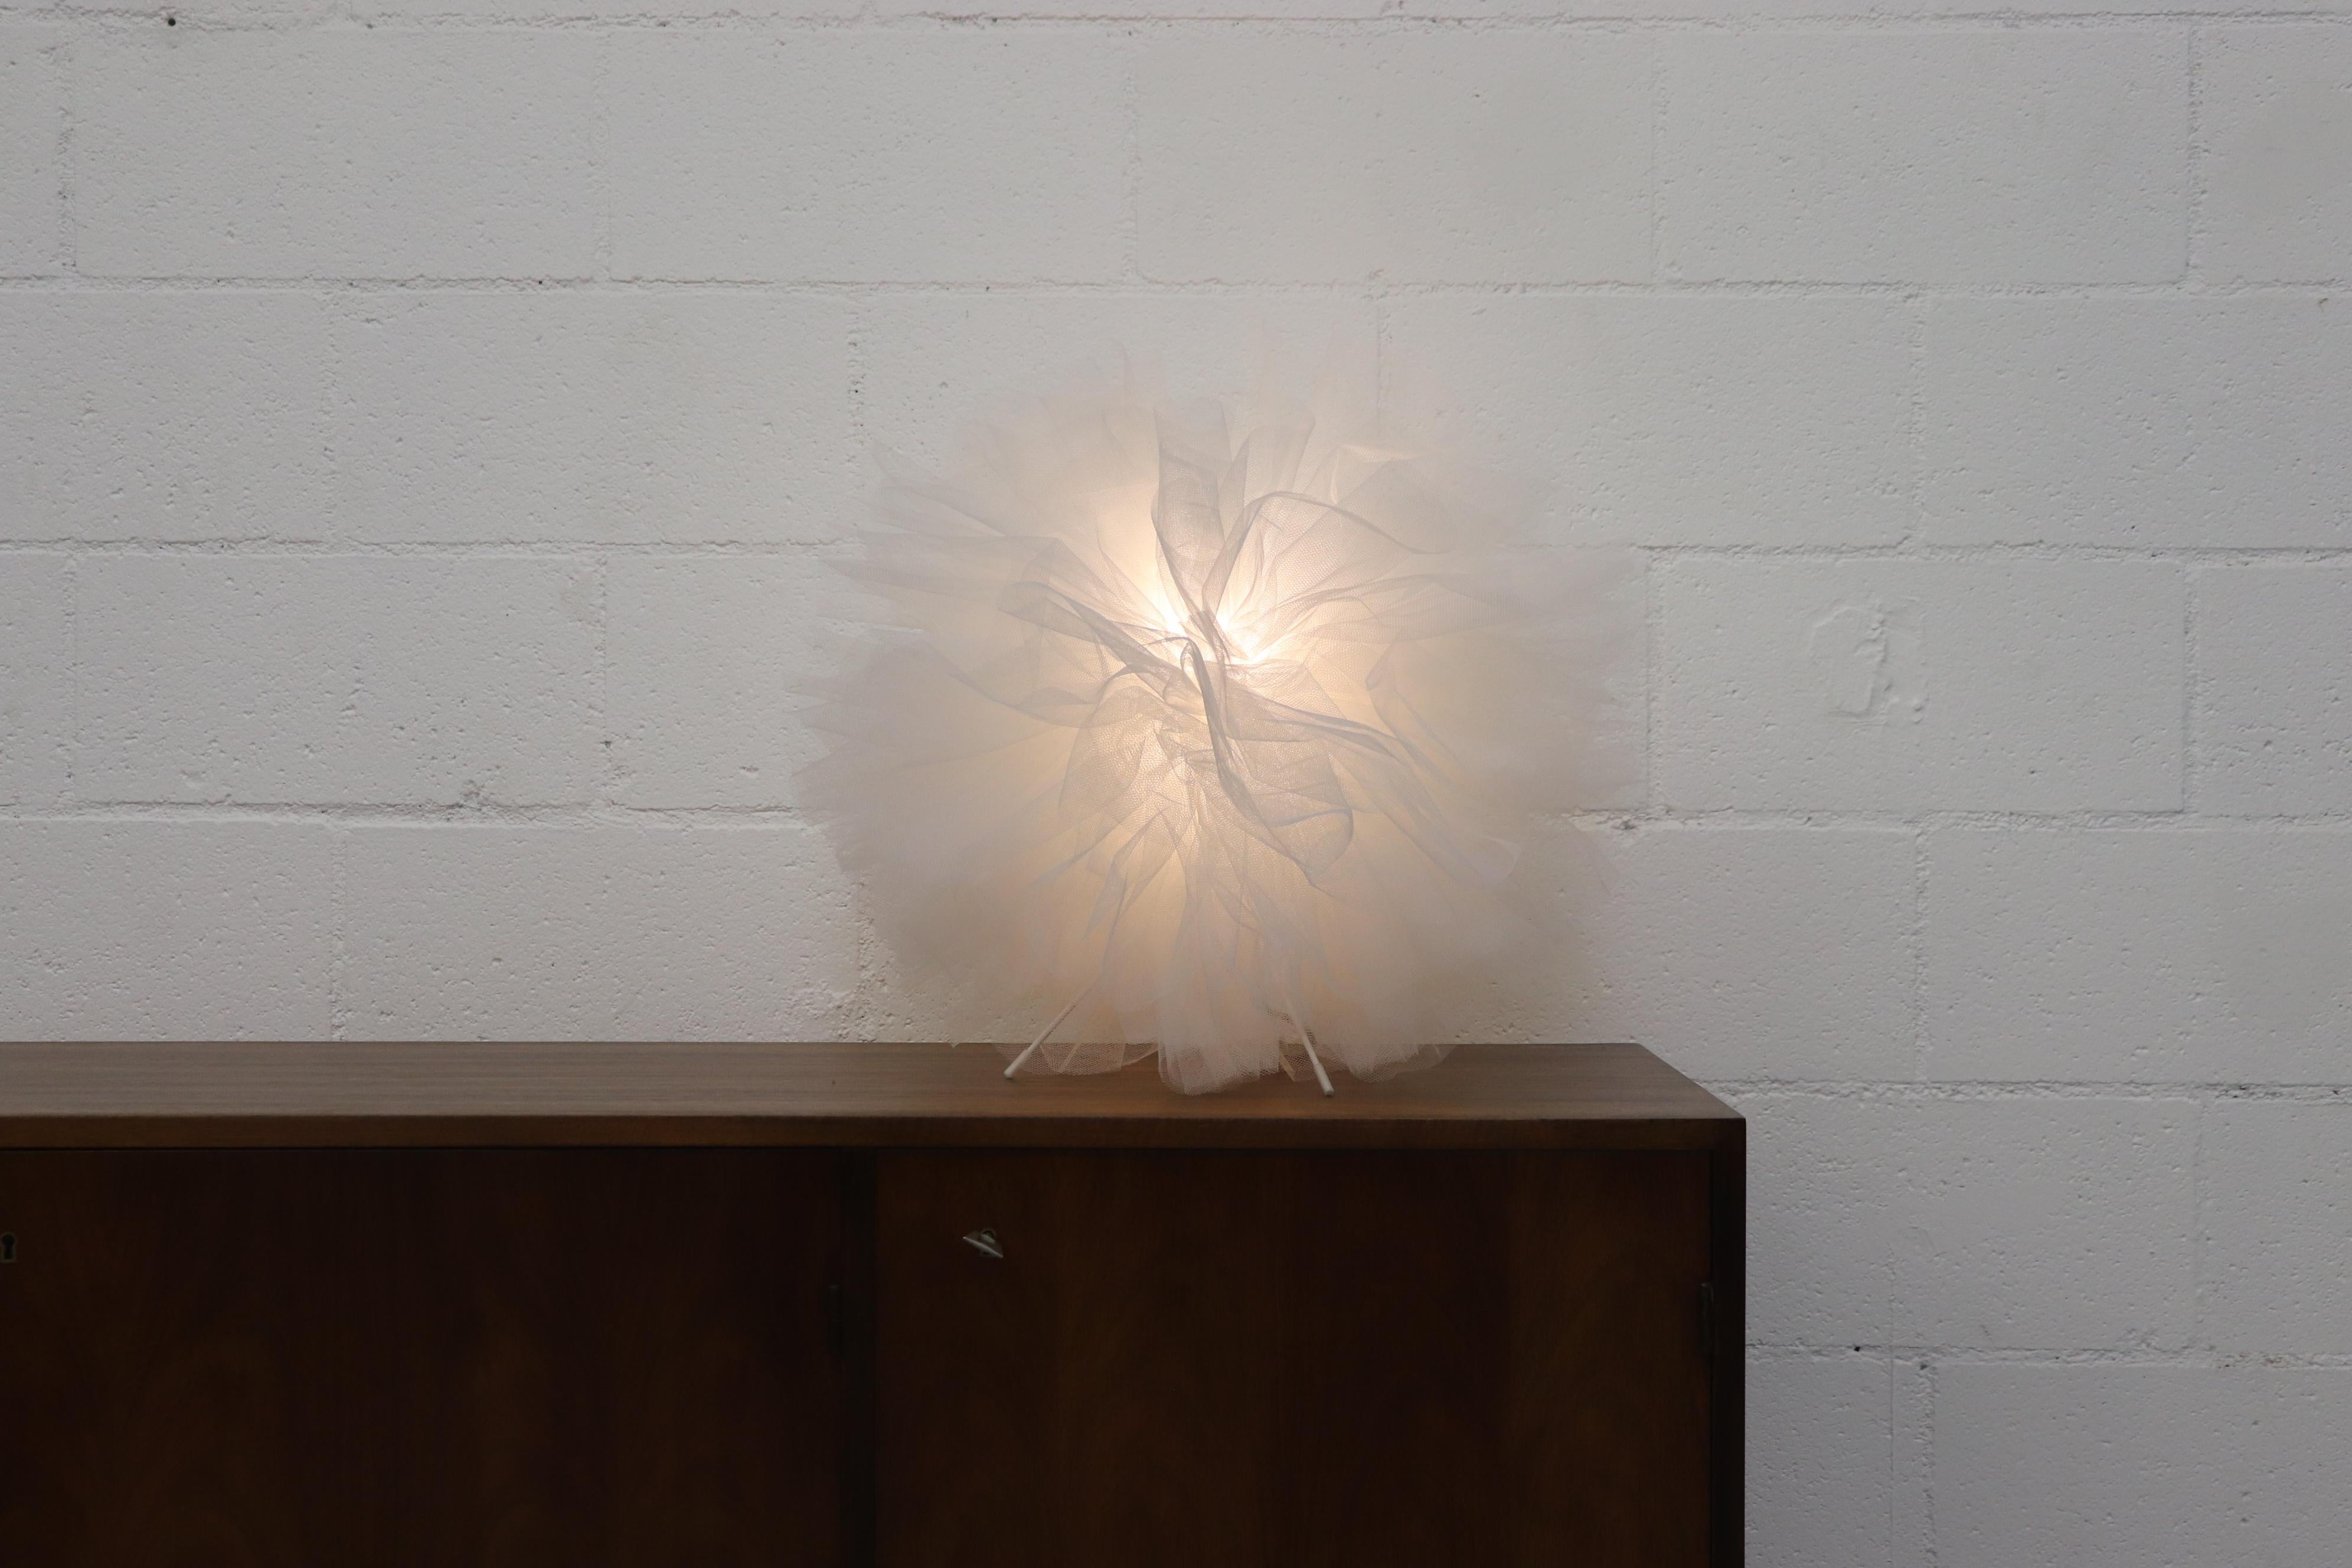 Beautiful table lamp by Gijs Bakker & Herman Hermsen. The 'ballroom lamp no. 2' designed in 1997, is a creative conversation piece designed to resemble a carnation. Made of fine white lace netting on a light wire metal frame it is in original